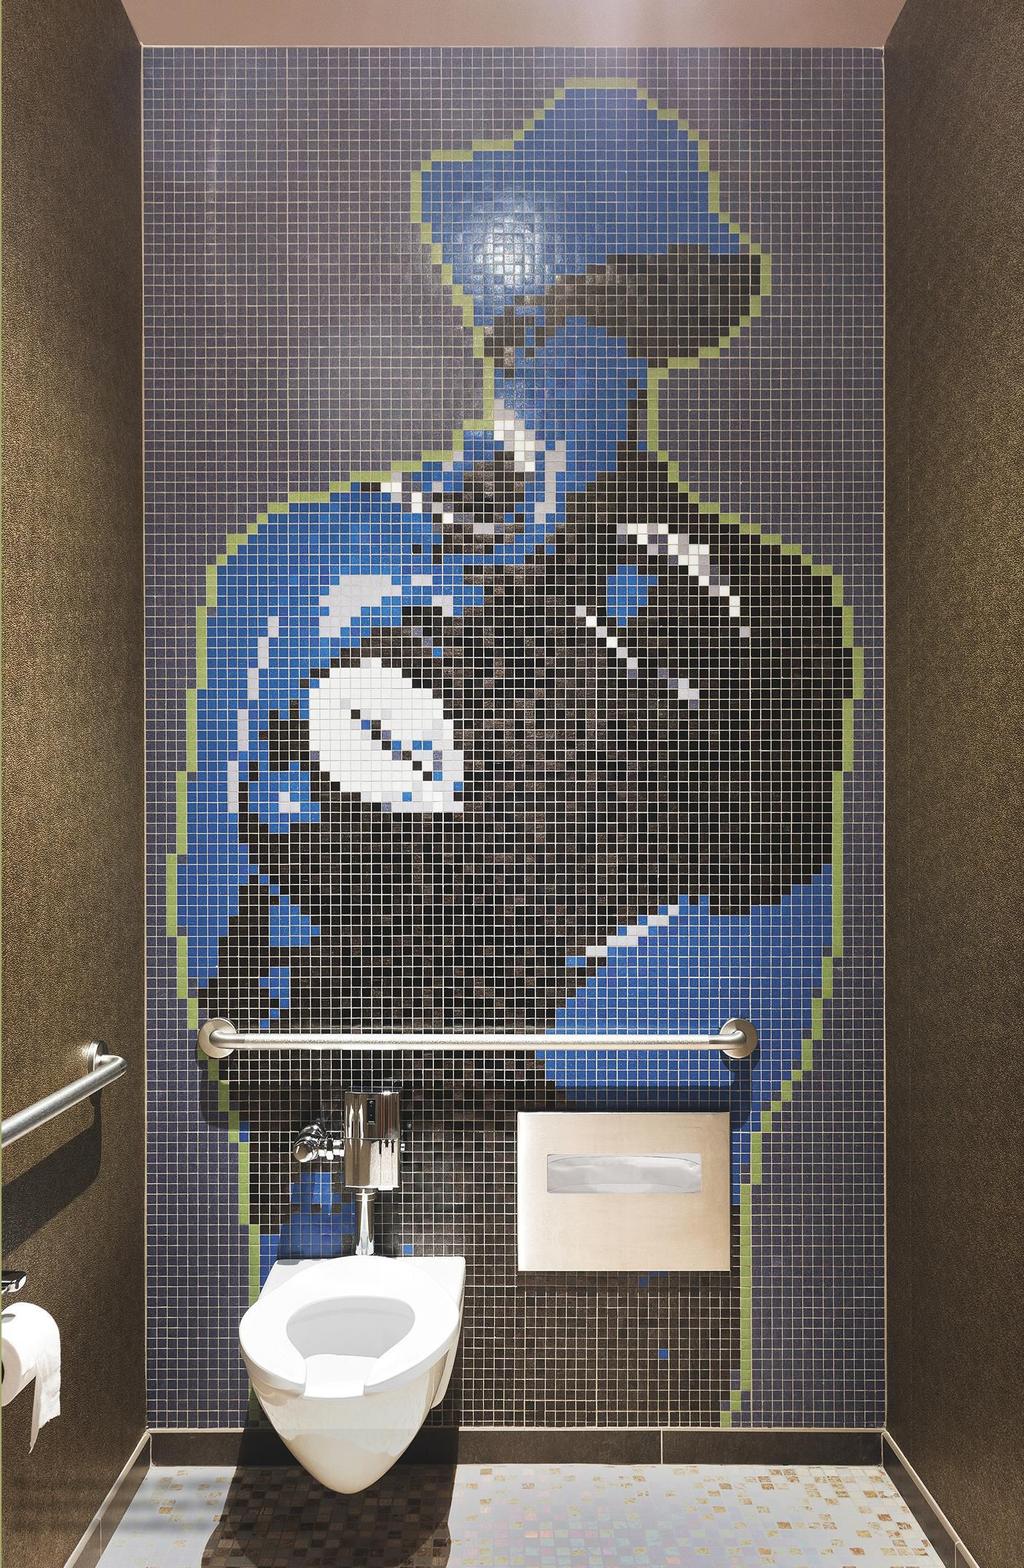 So our mosaic design was created to be multidimensional and playful, said Nielsen.